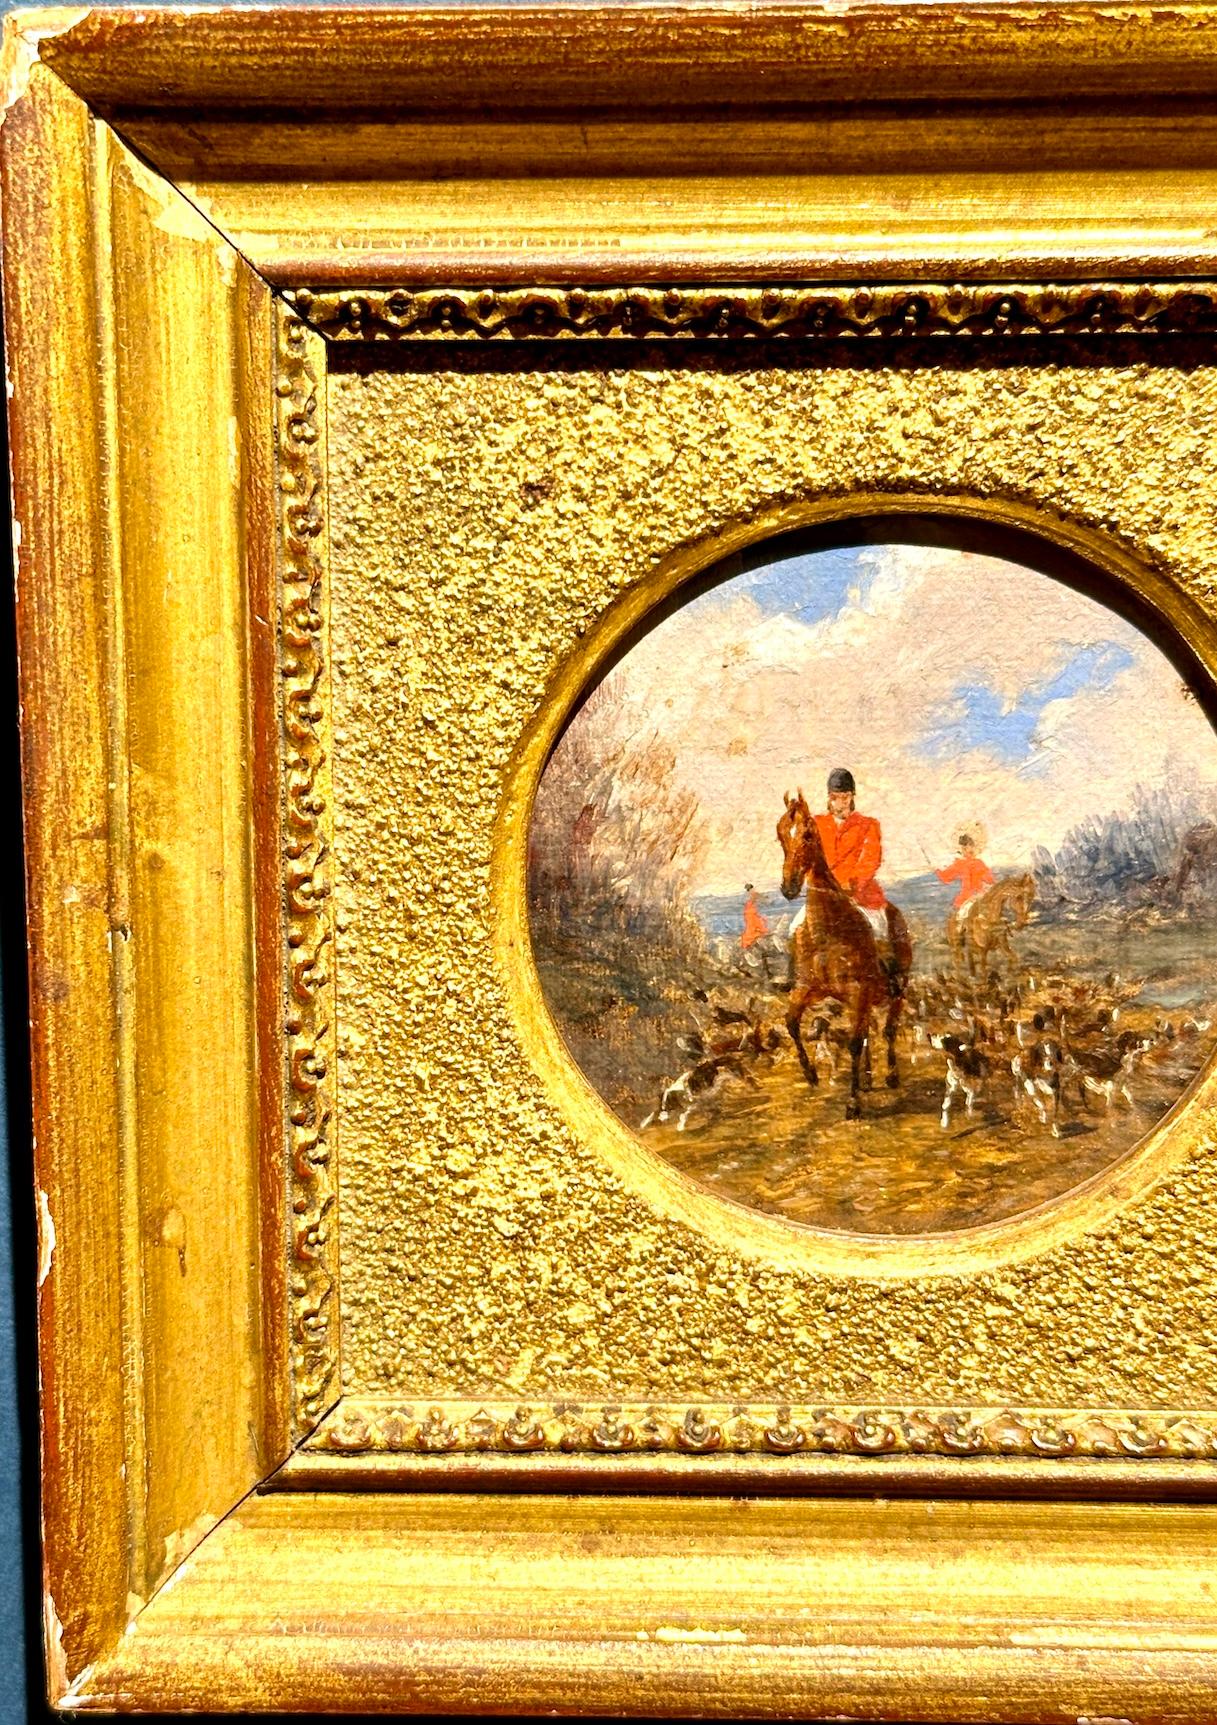 John Frederick Herring Junior, 

Antique 19th century English, pair of Huntsman riding with hounds in a landscape.

John Frederick Herring Jnr. was a painter of sporting and animal subjects in oil and watercolor. His style was very similar to that